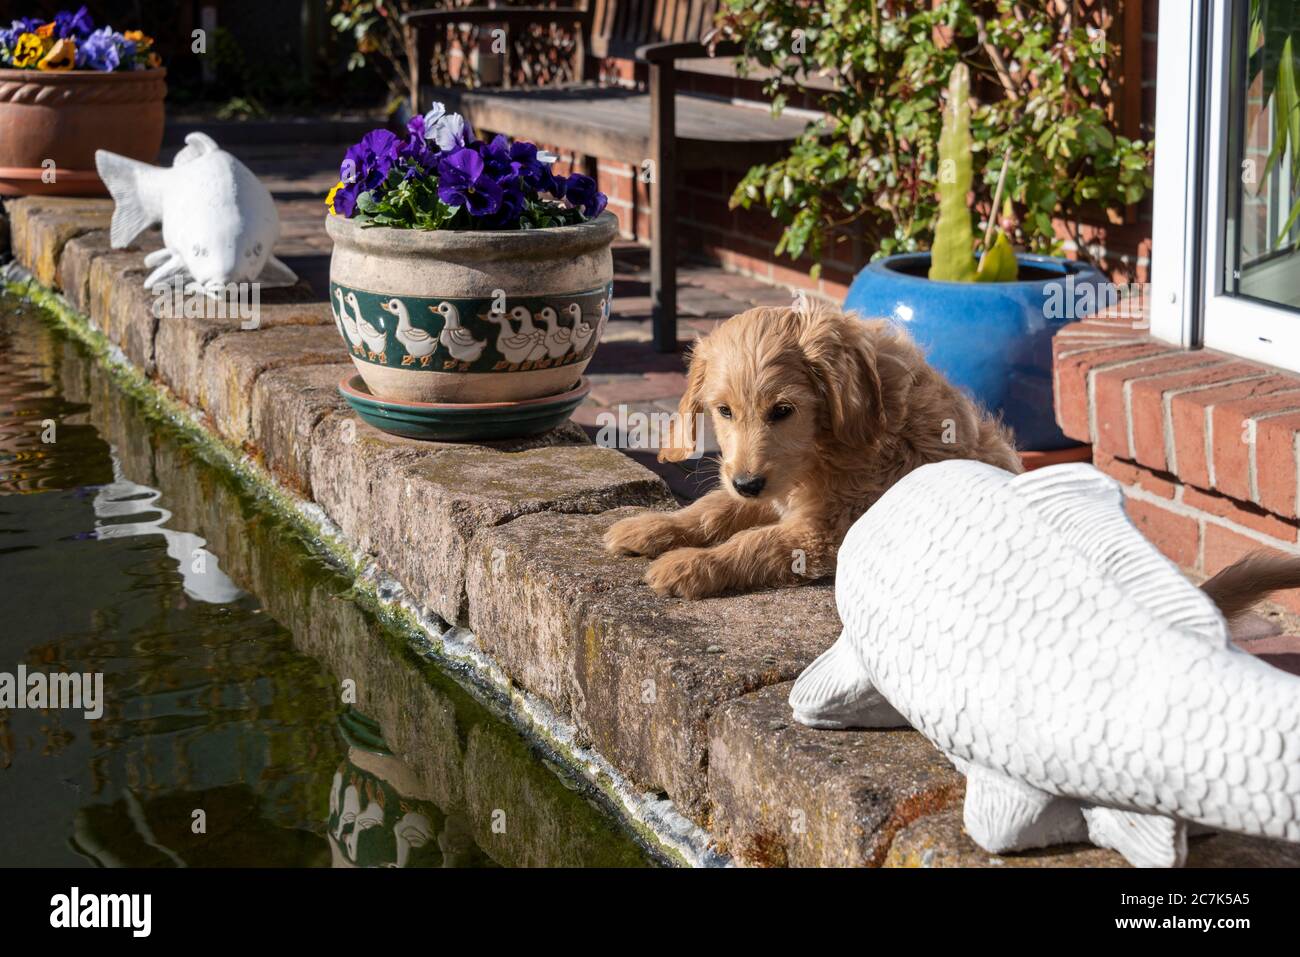 Puppy, Mini Goldendoodle, looks curiously into a koi pond. Stock Photo